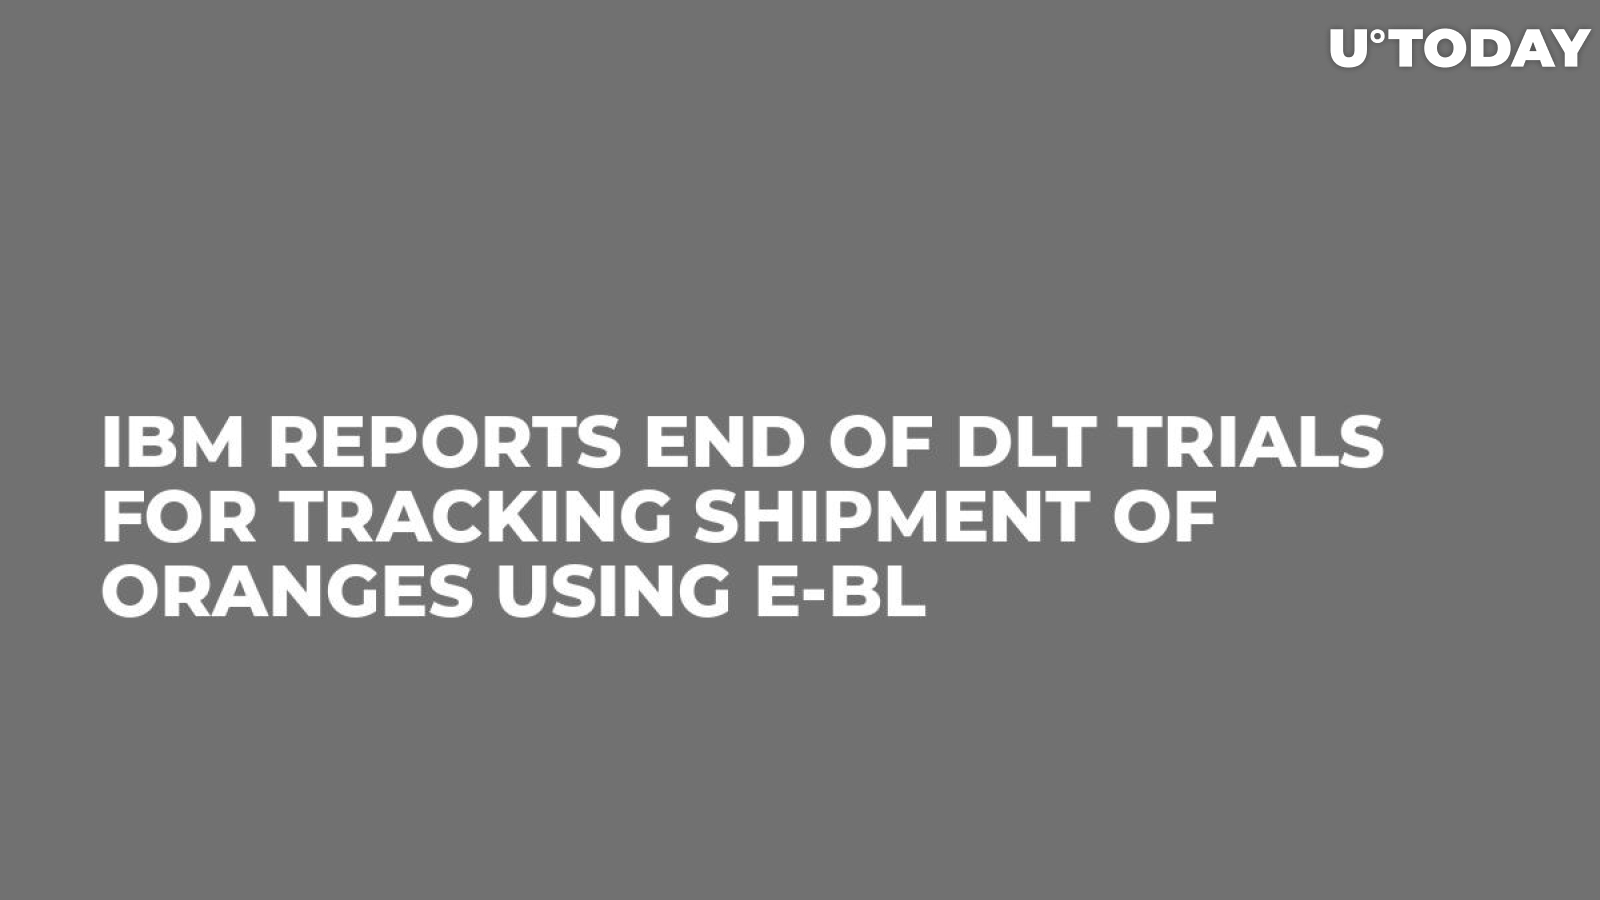 IBM Reports End of DLT Trials for Tracking Shipment of Oranges Using E-BL